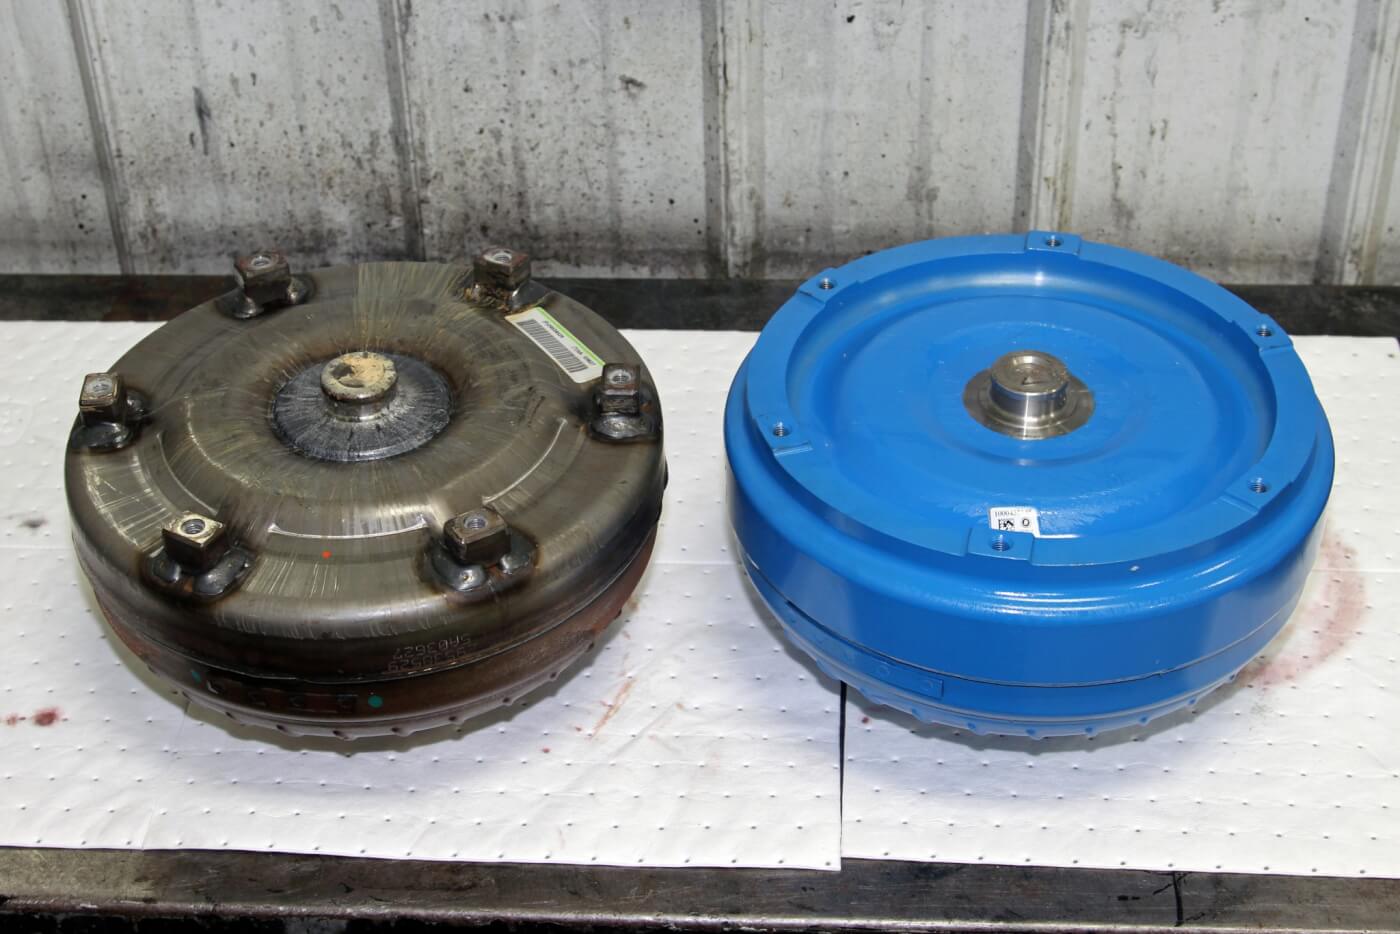 32. To better transfer engine power to the transmission, Merchant uses a new single disk torque converter with a billet front cover that’s much stronger than the factory stamped steel torque converter shown on the left.